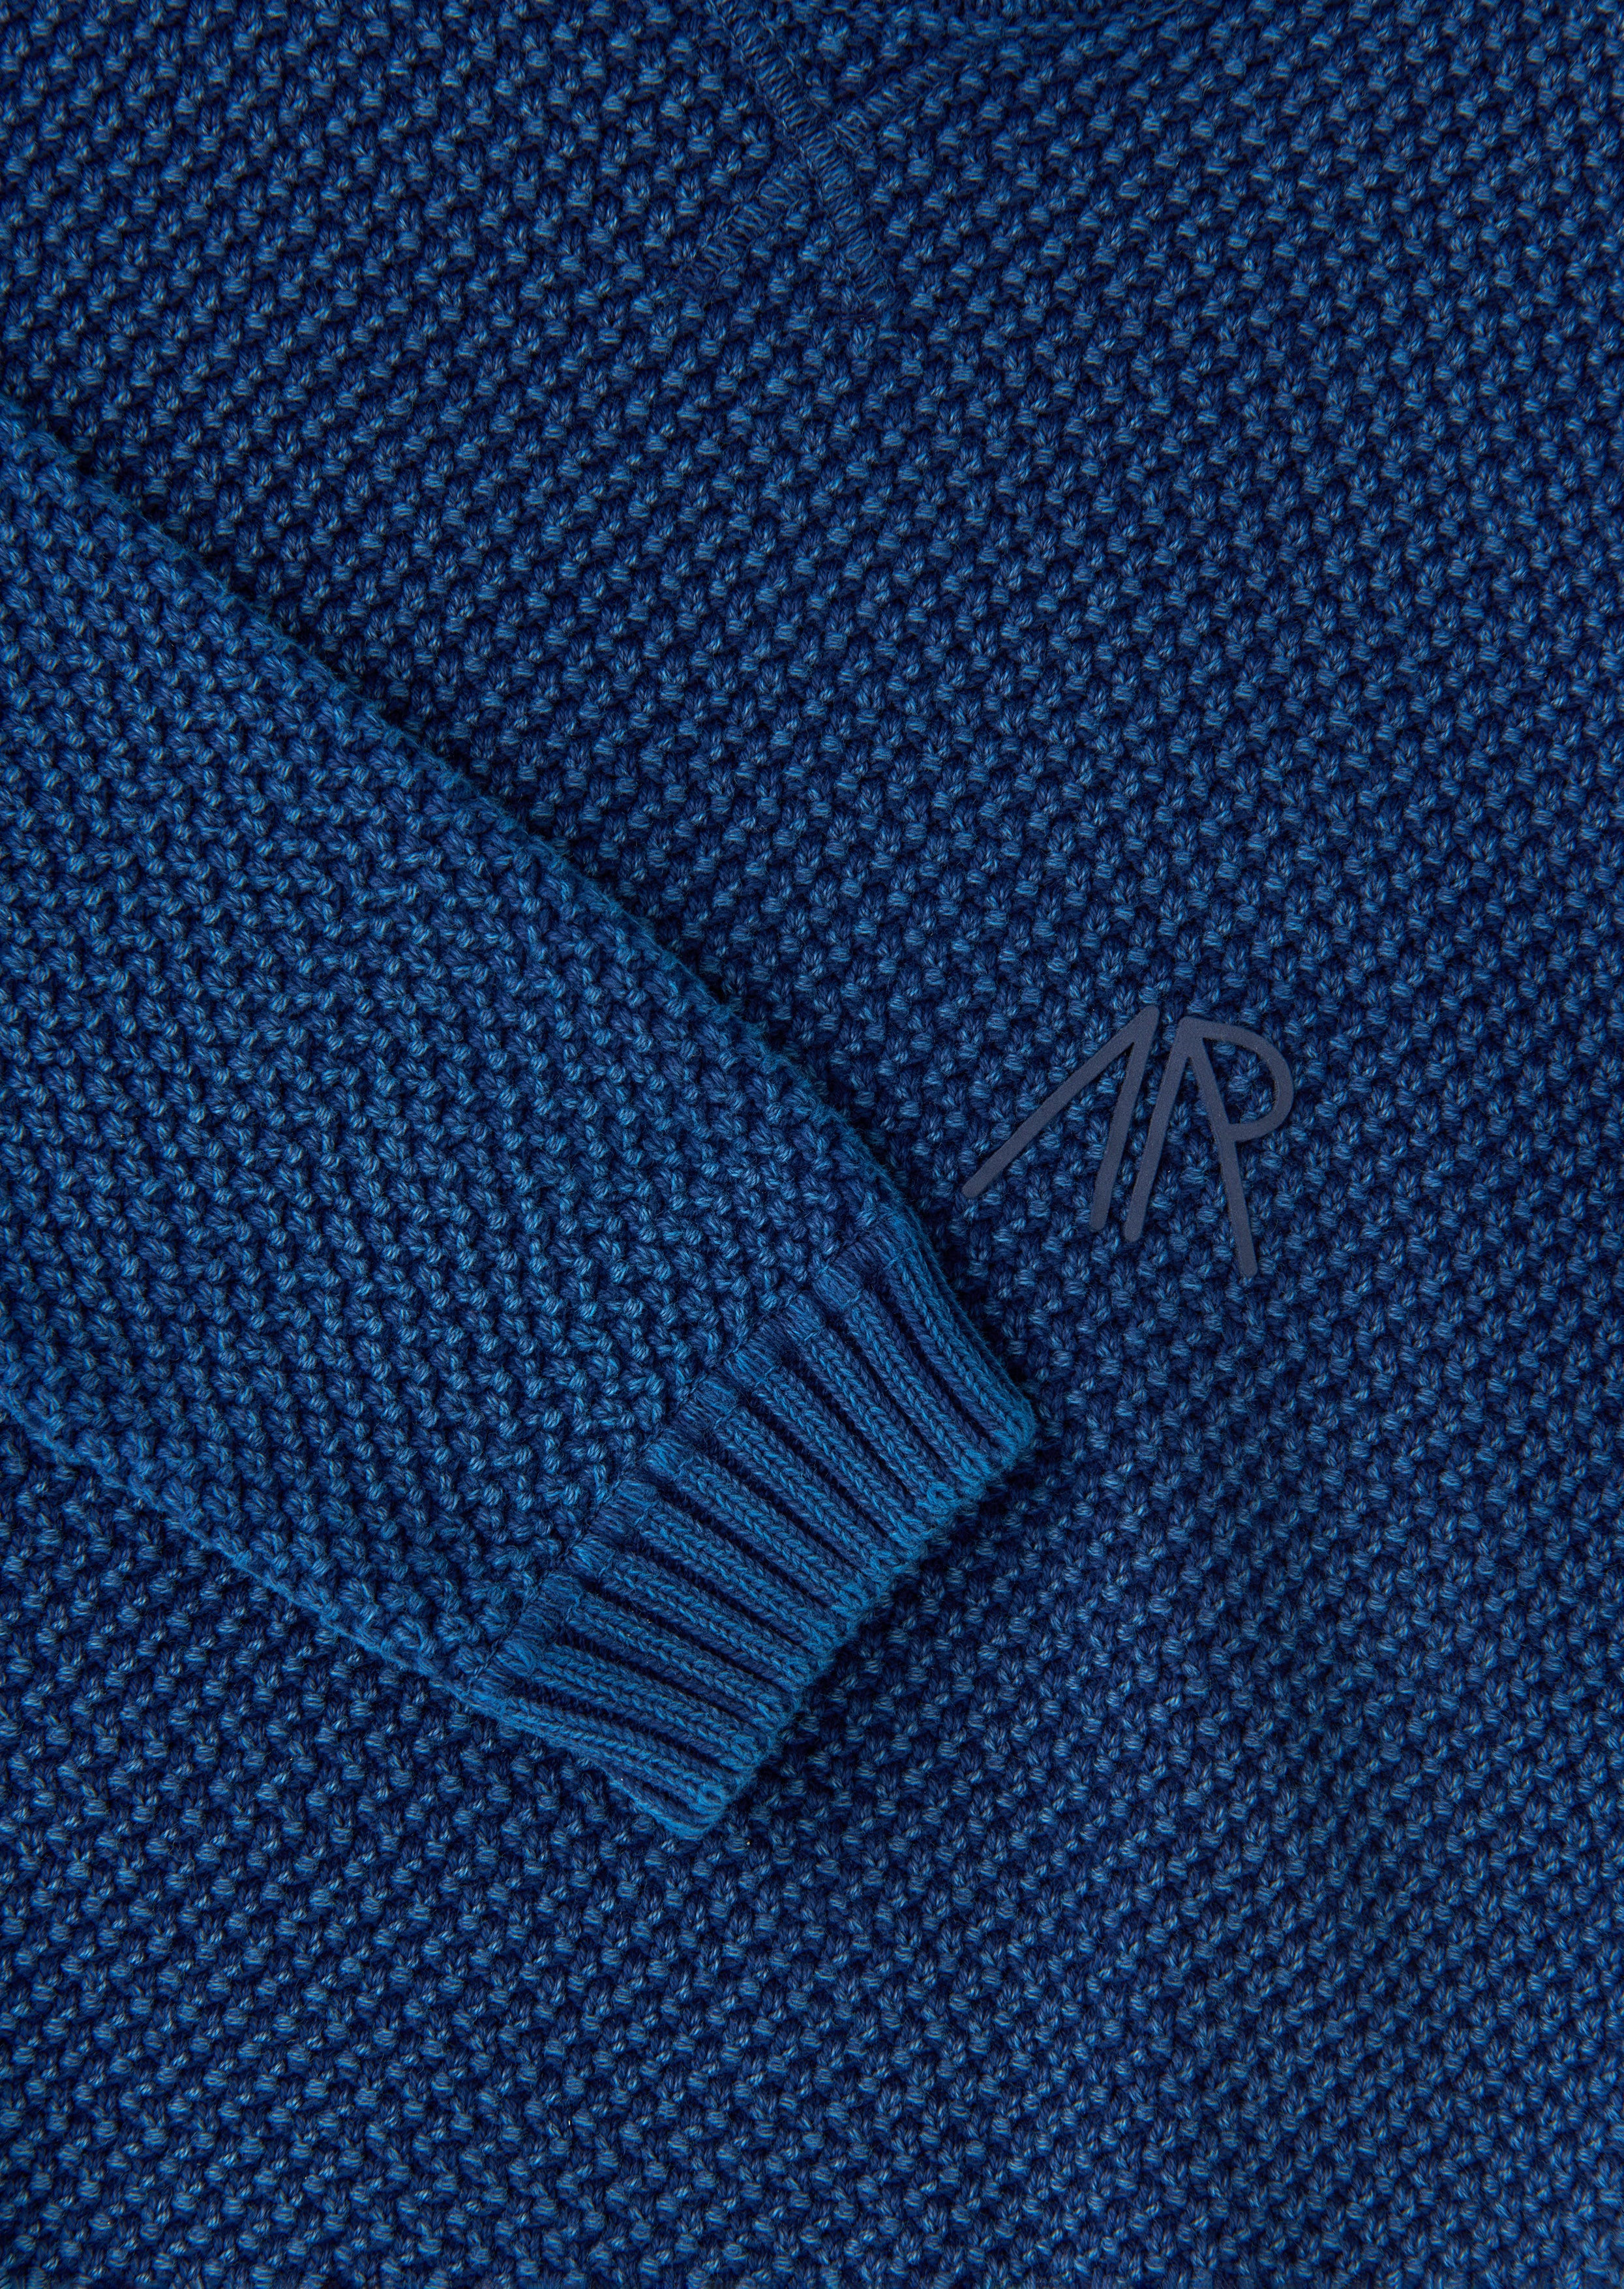 Boys Side Zip Ribbed Blue Sweater